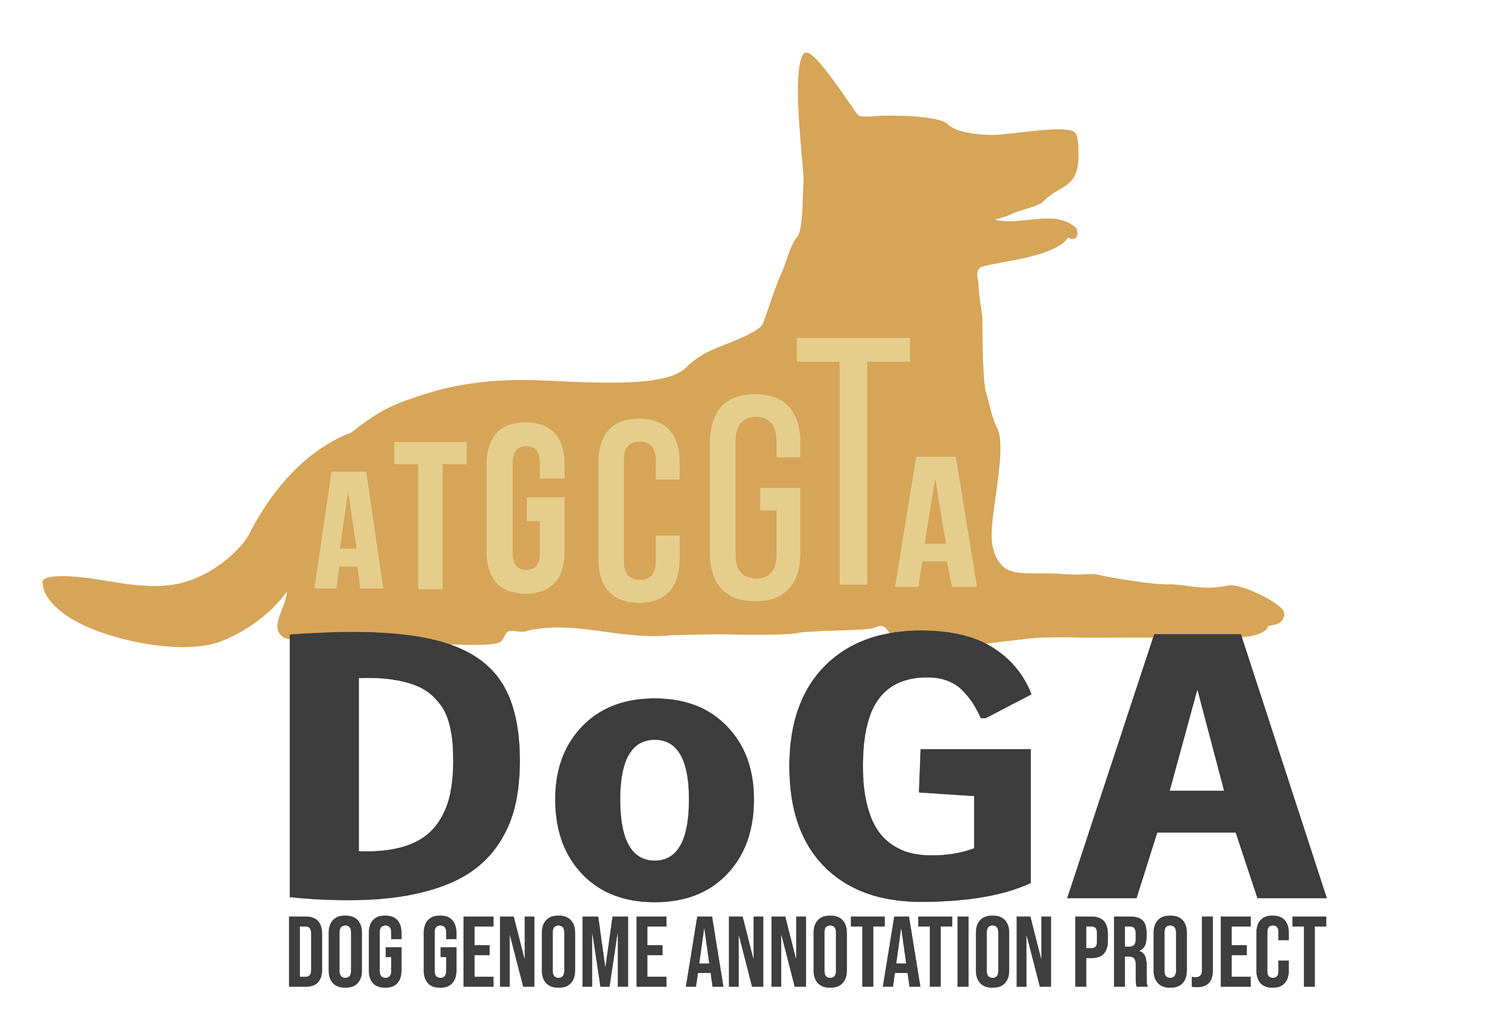 THE DOG GENOME ANNOTATION (DoGA) PROJECT